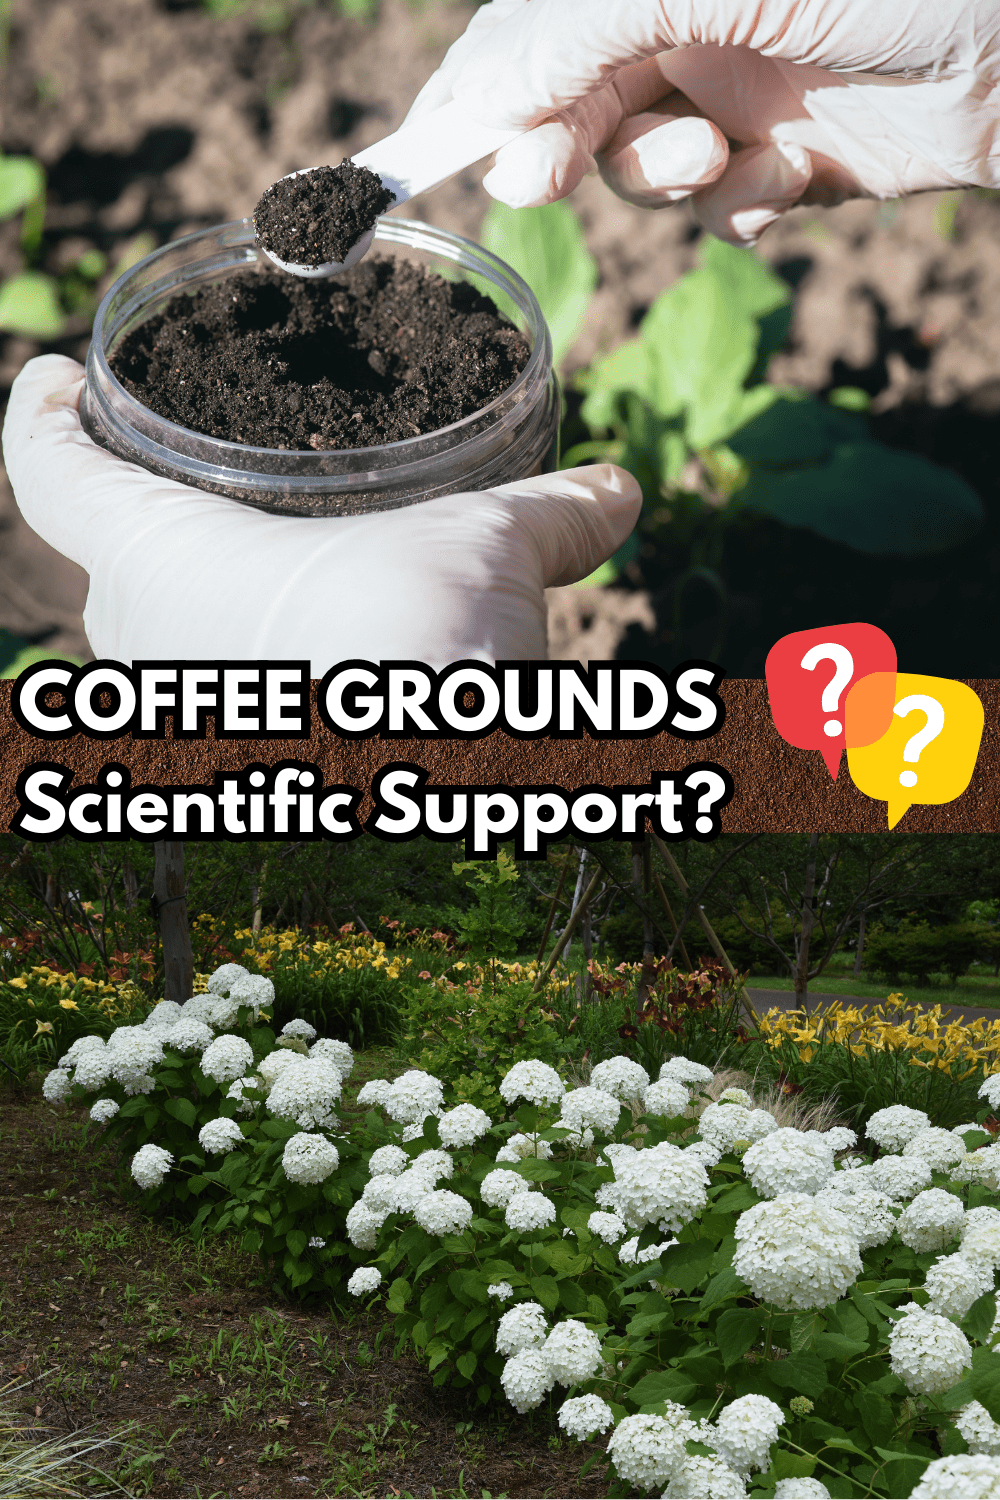 Coffee Grounds has Scientific Support or no